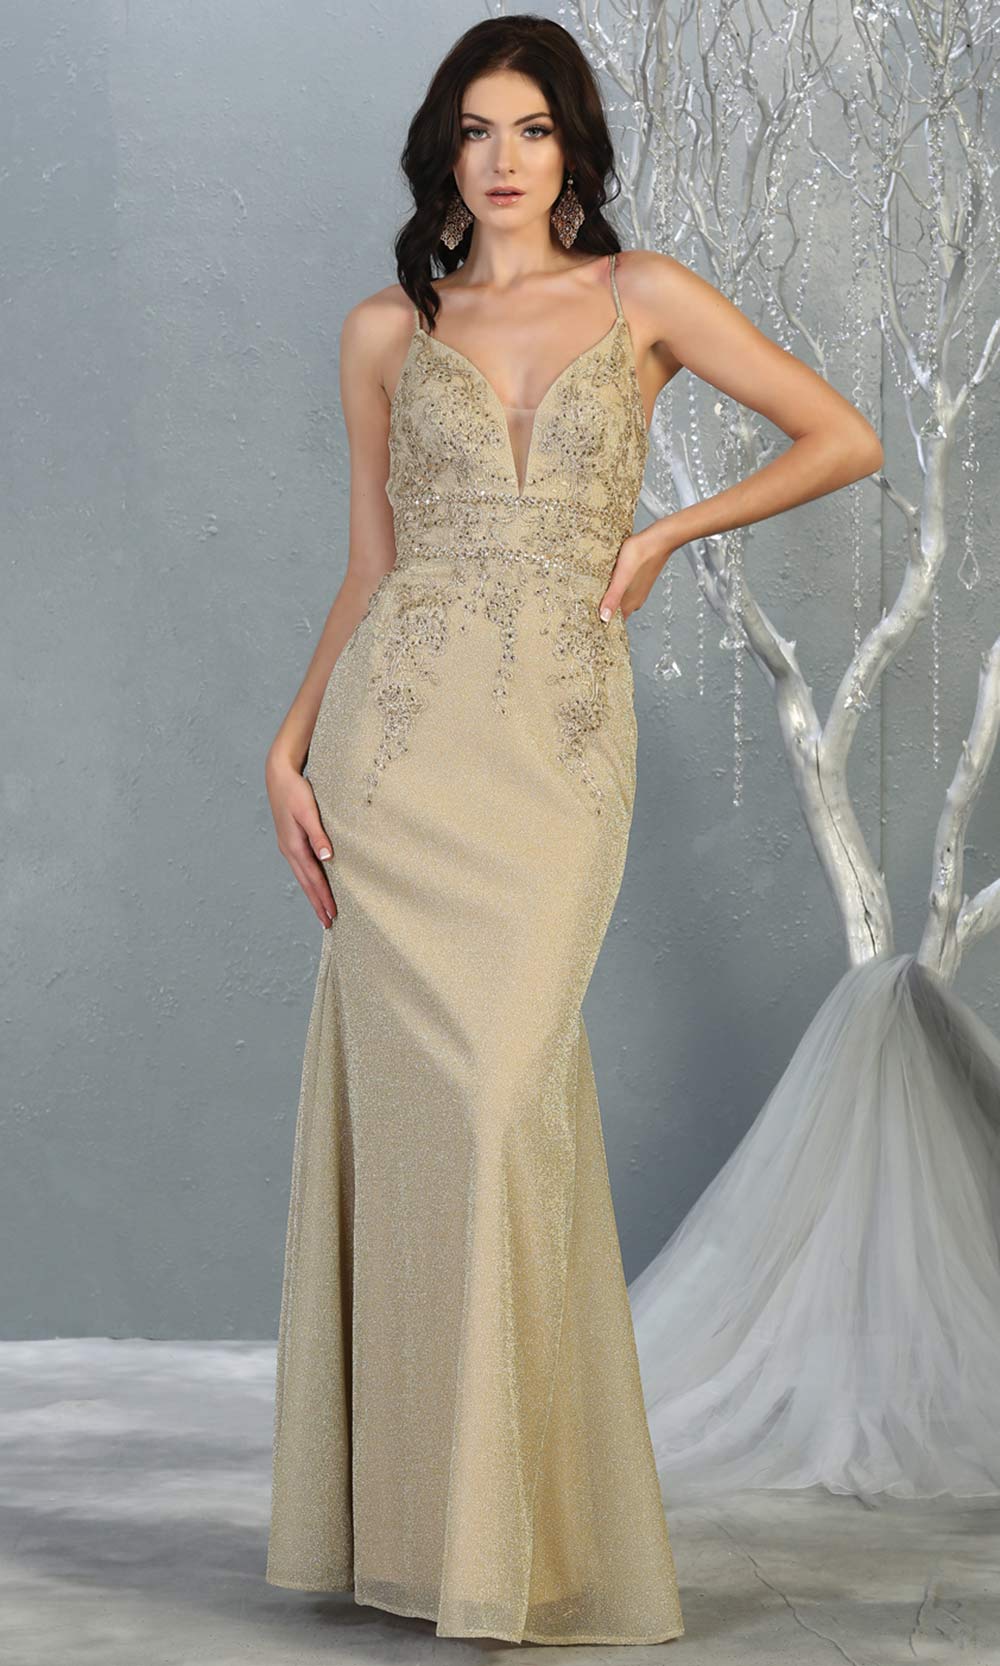 Mayqueen MQ1796 long champagne v neck evening fitted dress. Full length light gold glittery gown w/straps is perfect for  enagagement/e-shoot dress, formal wedding guest, indowestern gown, evening party dress, prom, bridesmaid. Plus sizes avail.jpg